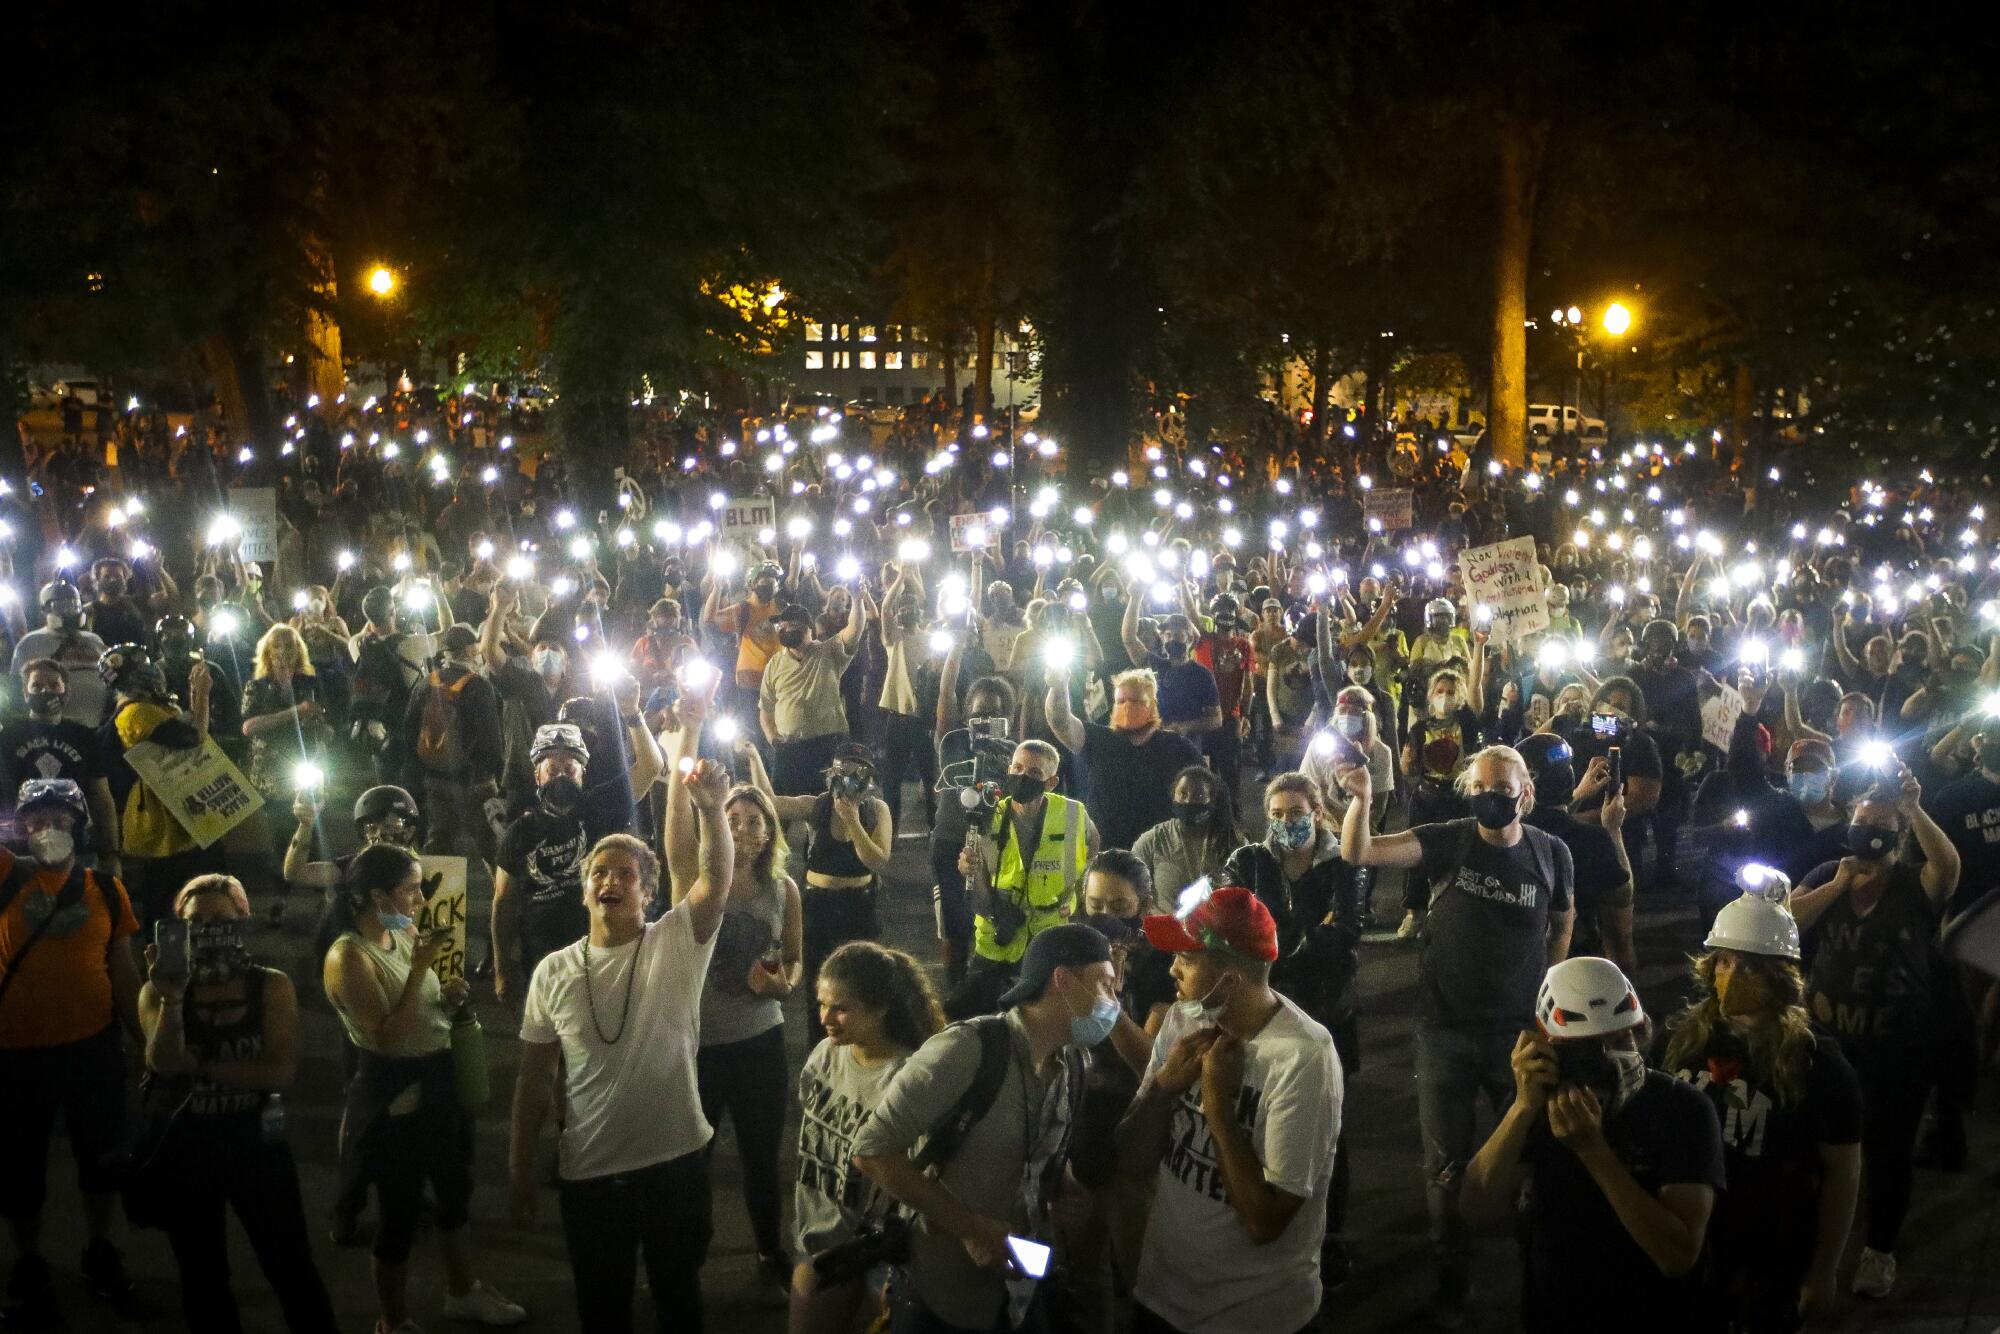 Demonstrators raise their cellphone lights as they chant slogans.